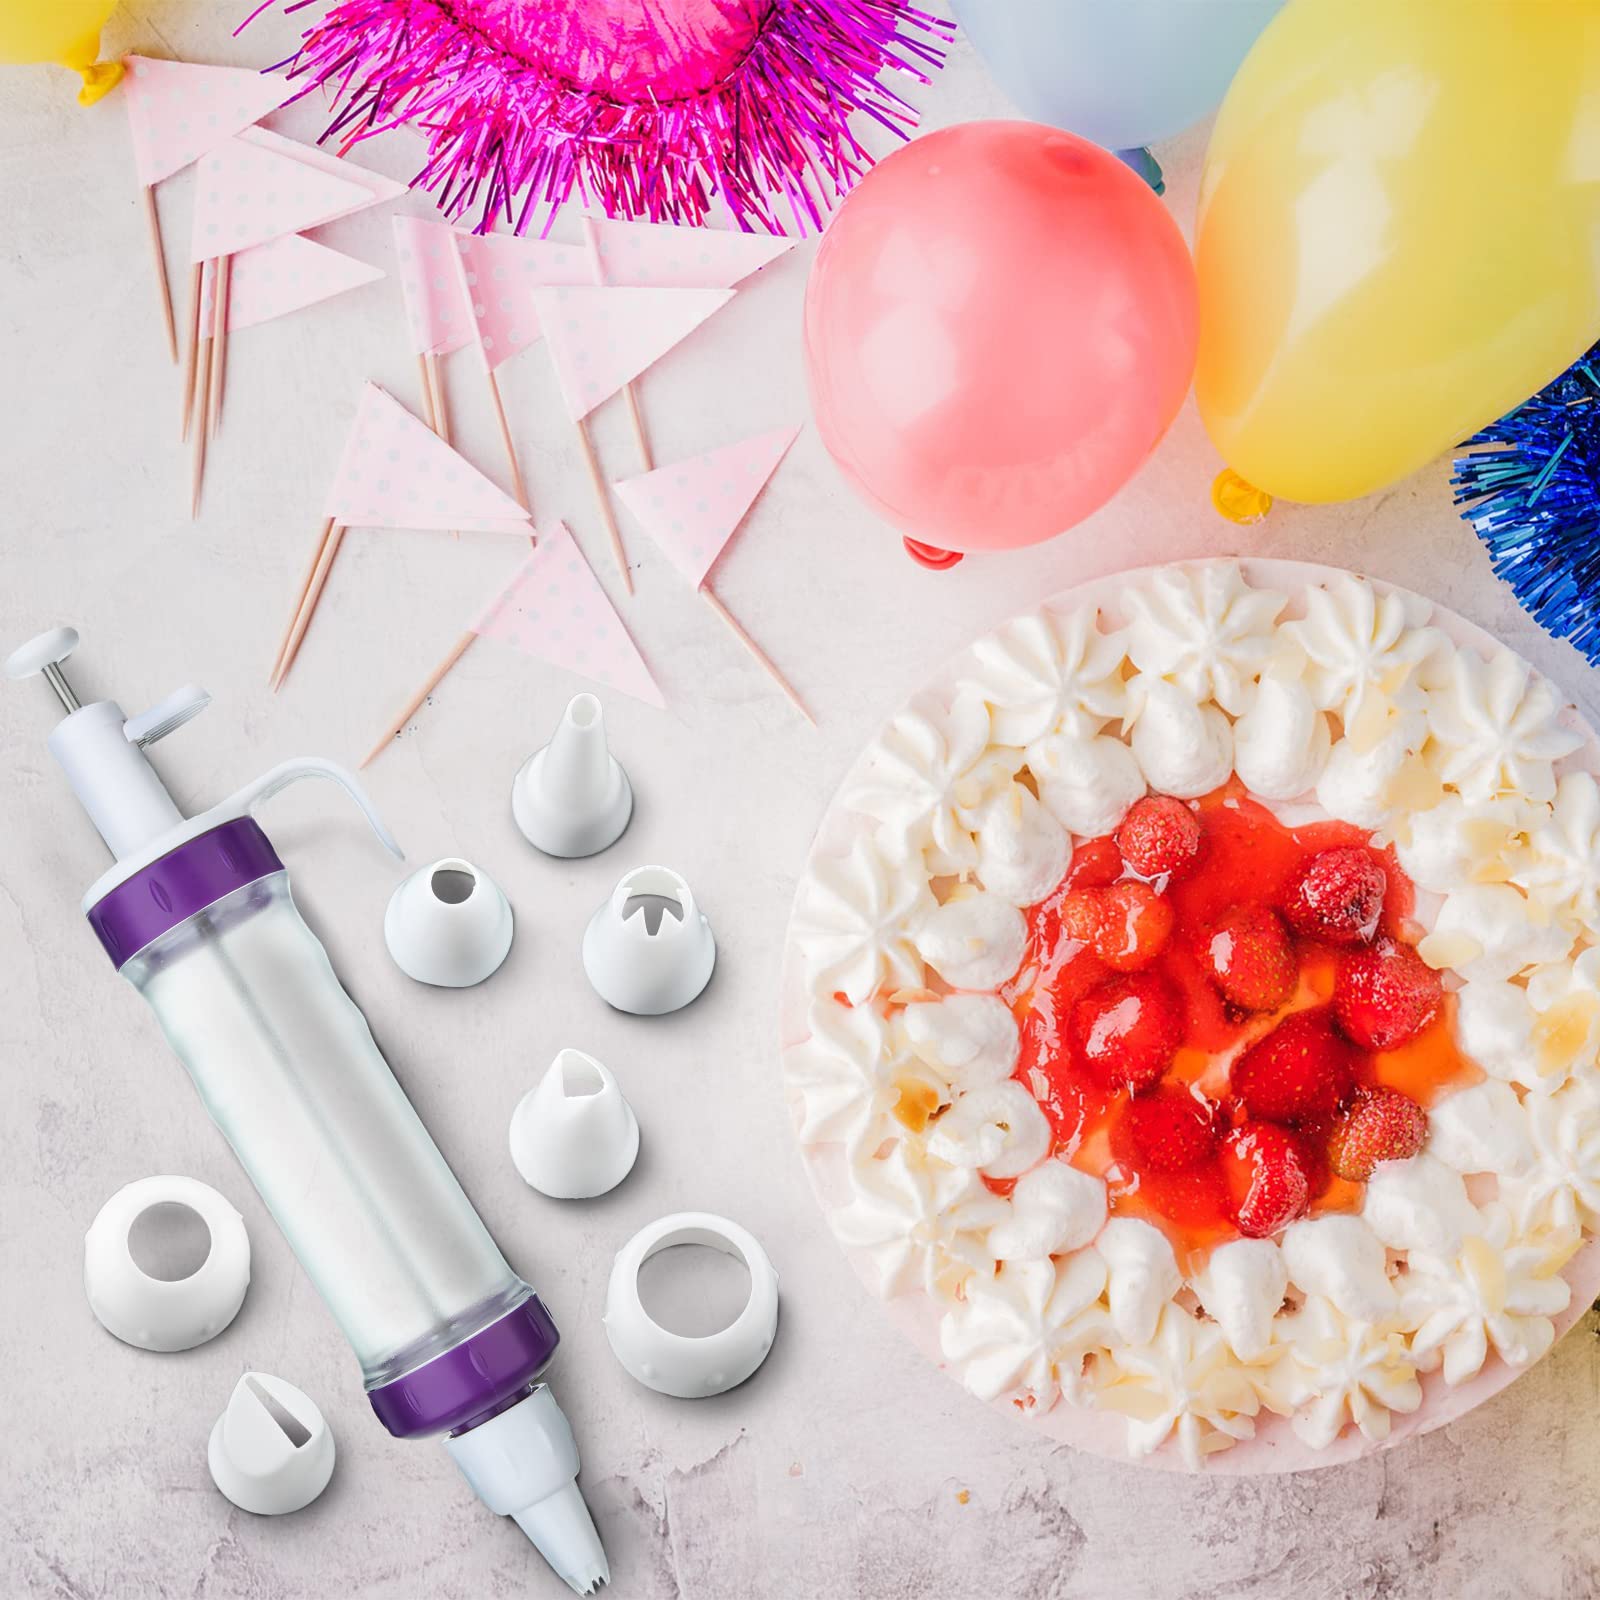 Dessert Decorating Syringe Set, Cupcake Frosting Filling Injector with 7 Plastic Icing Nozzles and 3 Cream Scrapers Dessert Cream Piping Syringe Nozzles Kits for Cake